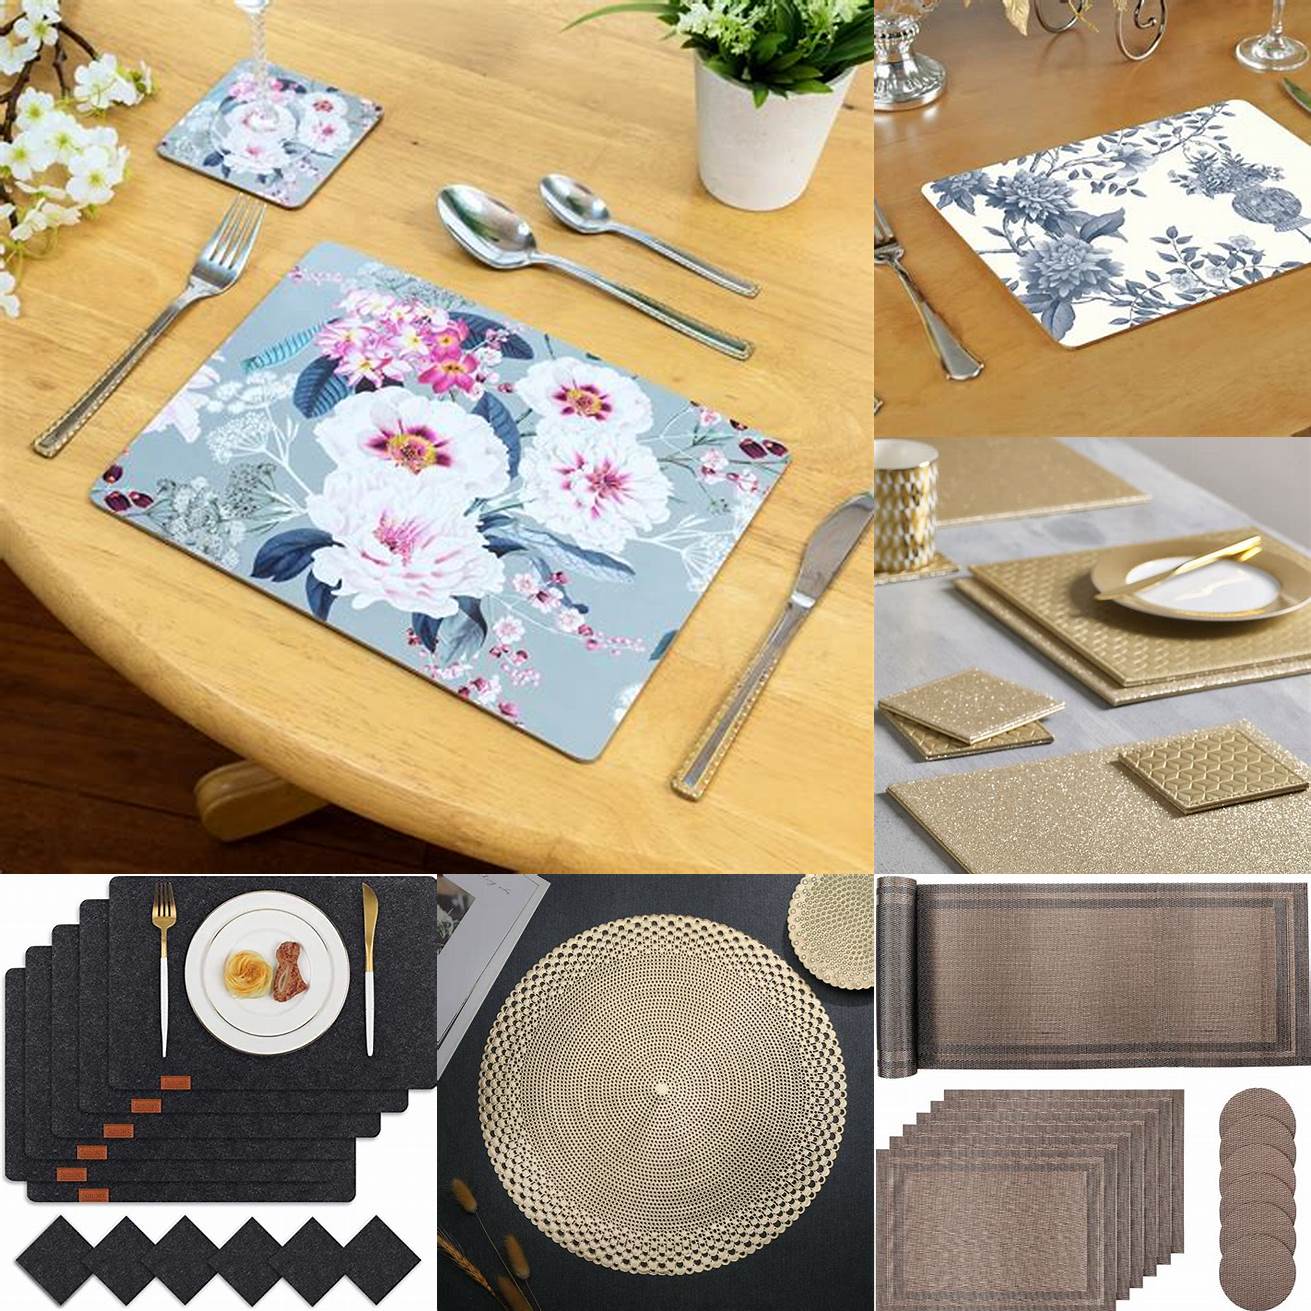 3 Use coasters and placemats